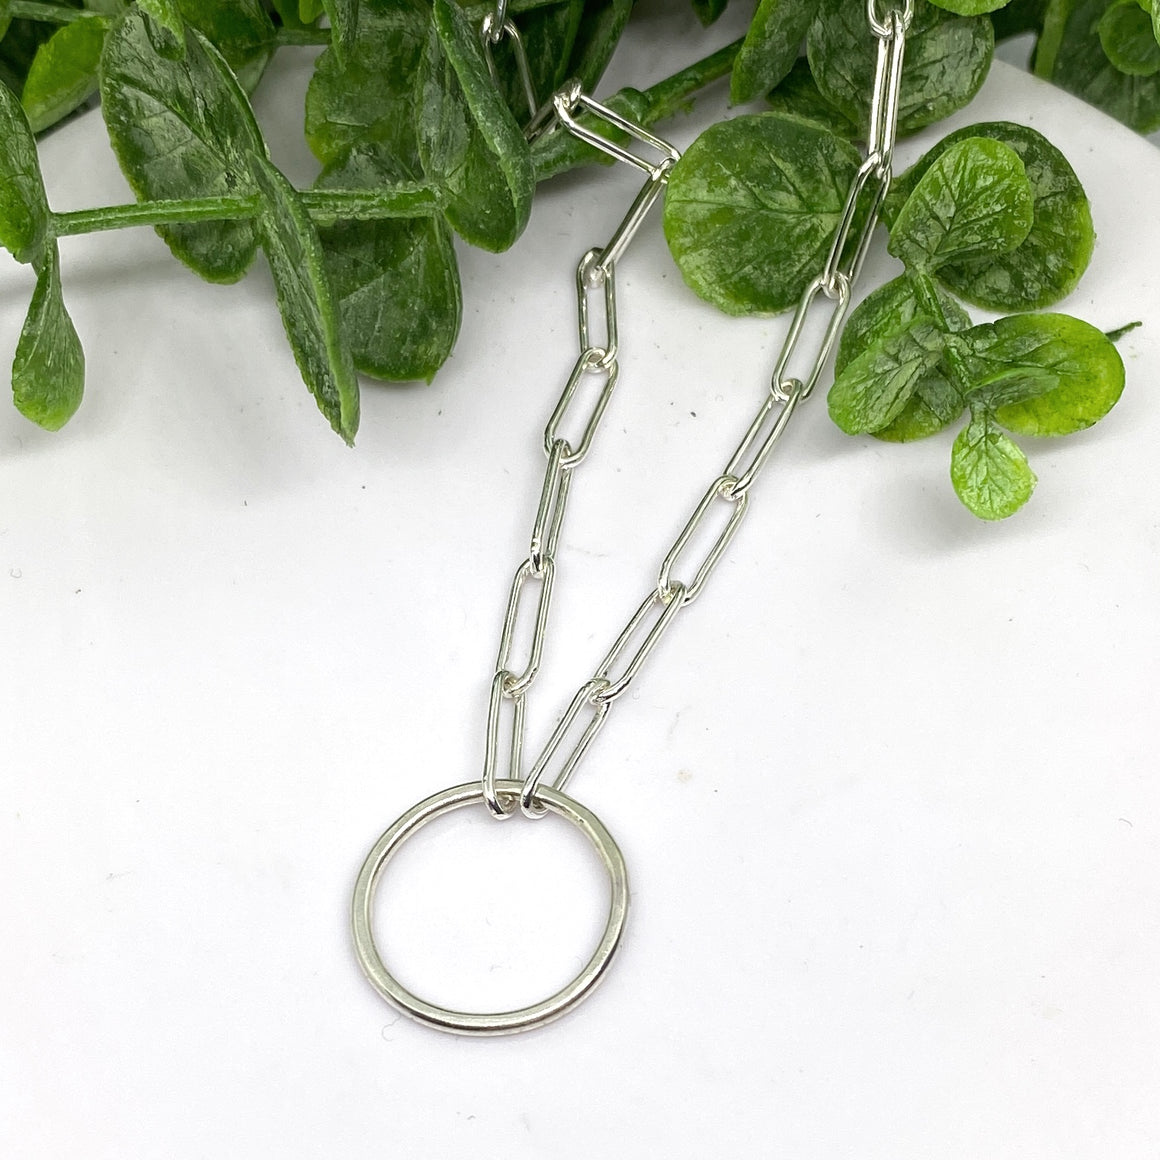 Simple Paperclip Sterling Silver Charm Holder Chain